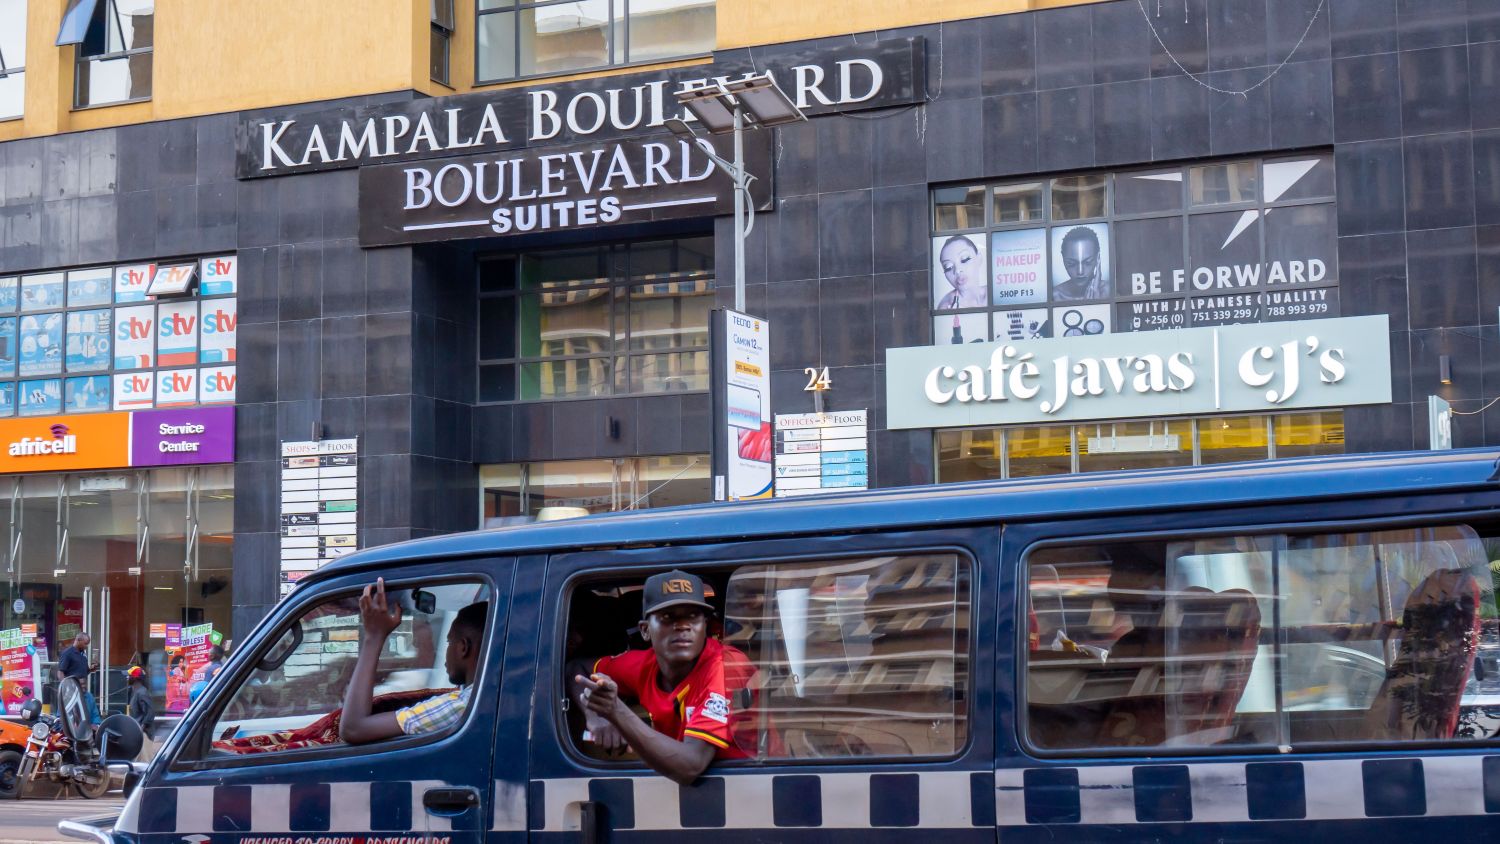 KAMPALA, UGANDA - JANUARY 05, 2020: A front view of Kampala Boulevard Suites, leading shopping mall and hotel with a foreground of an African man in a minibus, popular transportation for locals.